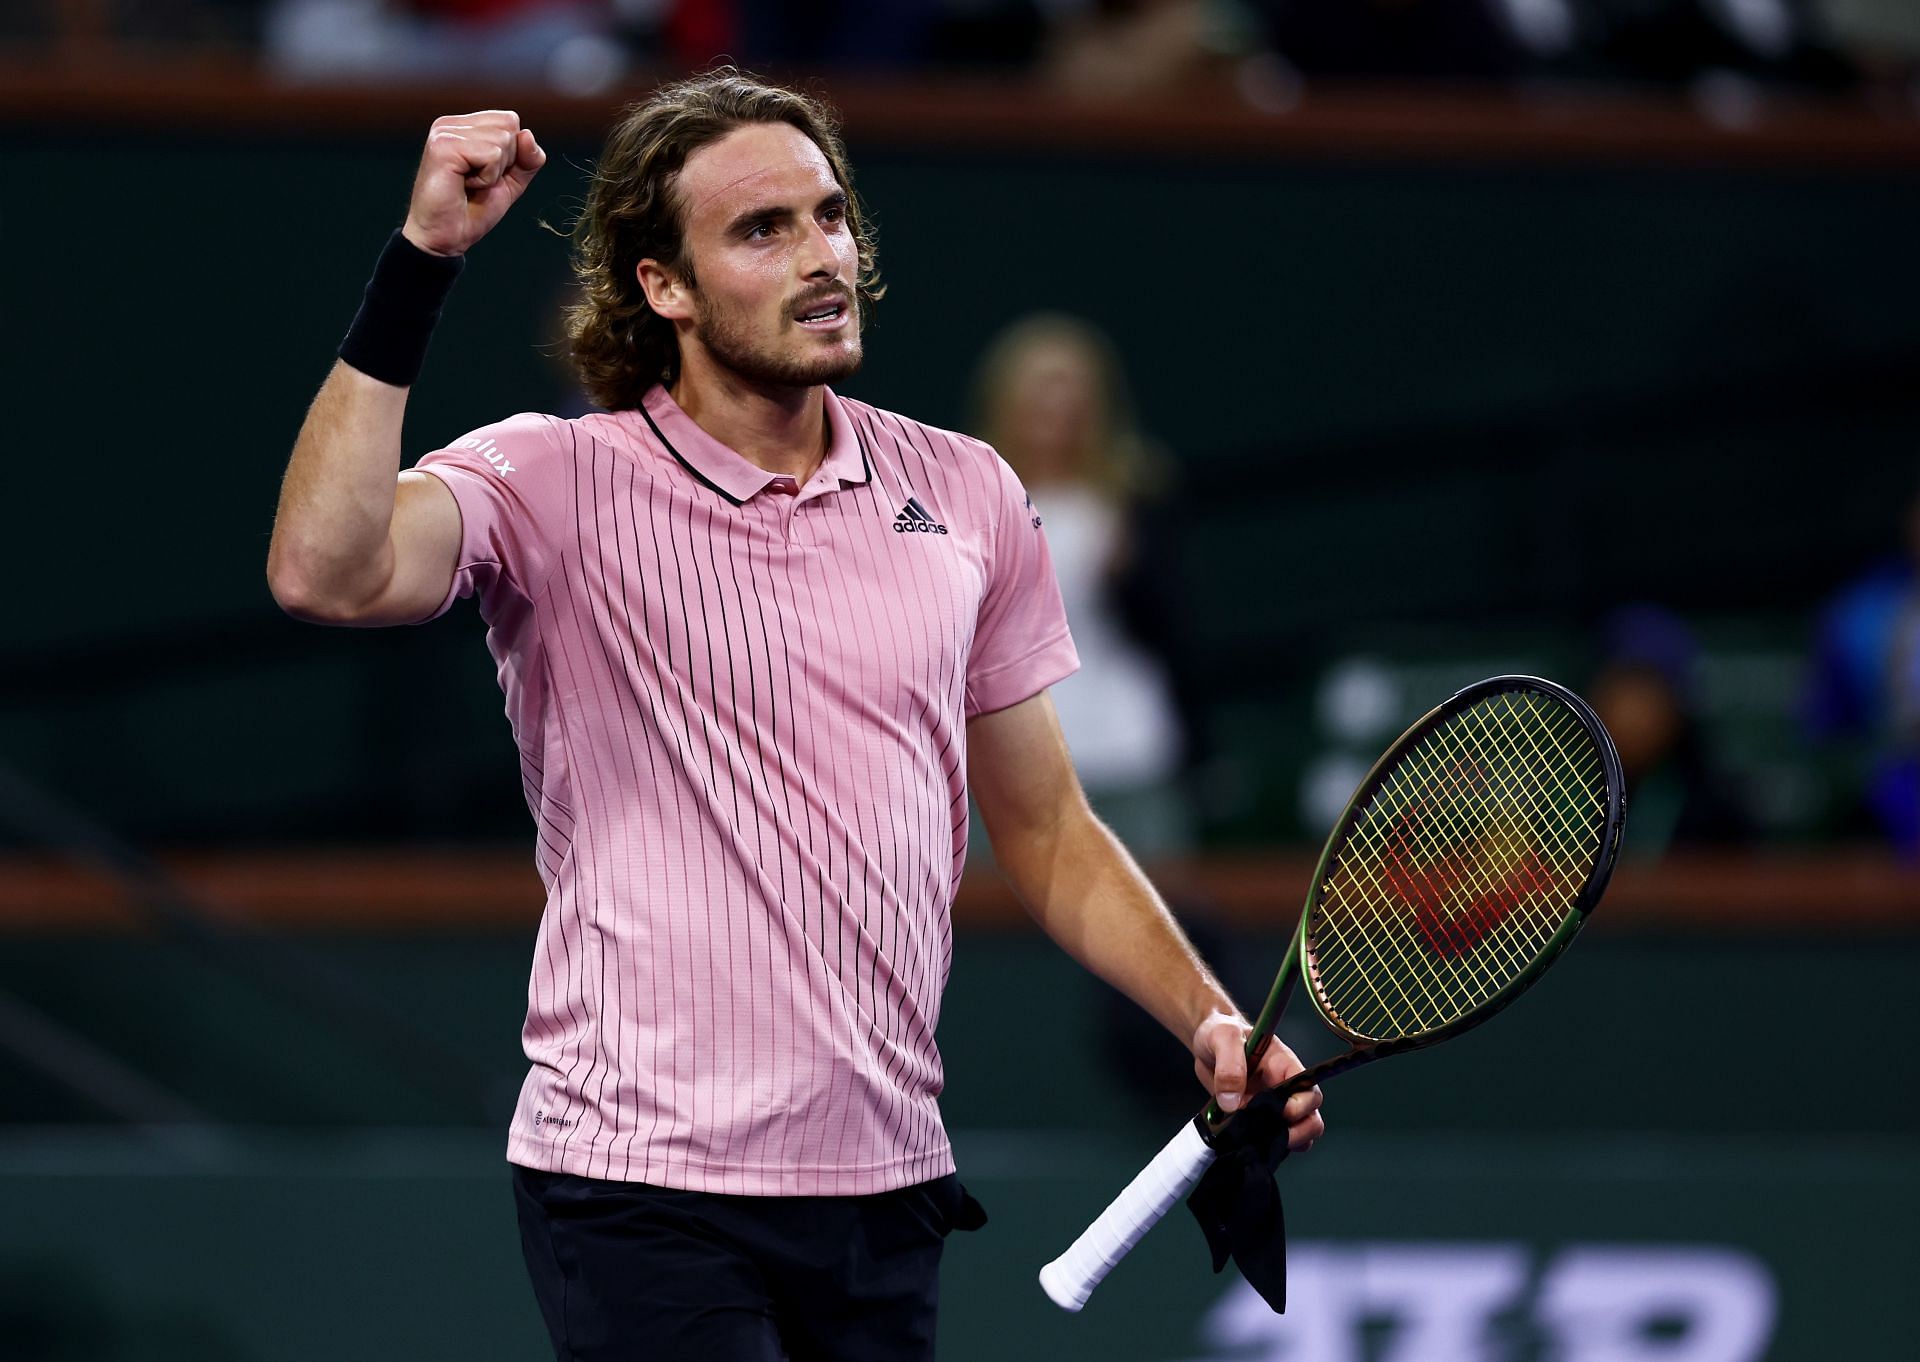 Miami Open 2022 Schedule Today TV schedule, start time, order of play, live streaming details and more Day 8